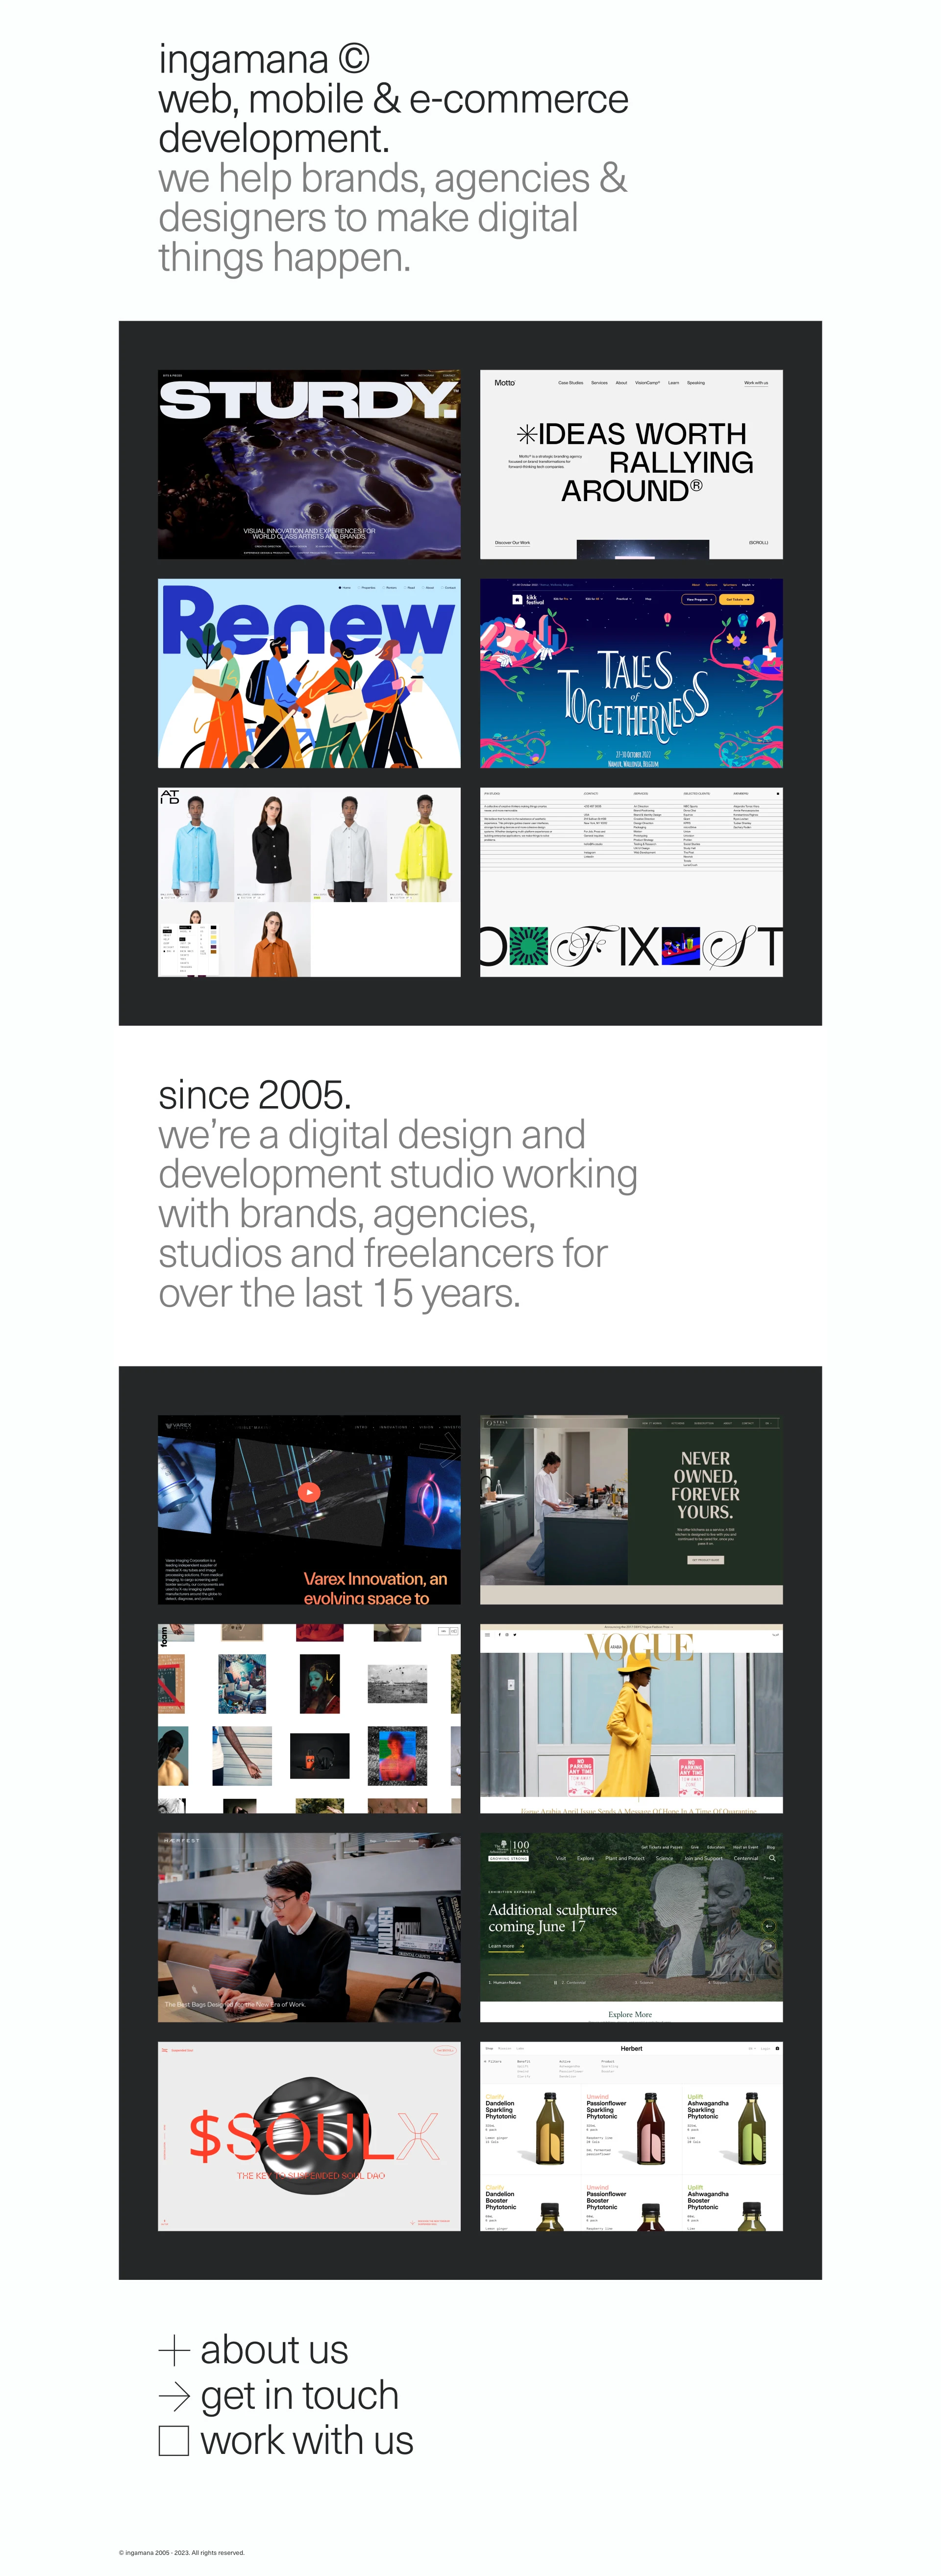 Ingamana Landing Page Example: Web, mobile & e-commerce development. We help brands, agencies & designers to make digital things happen. We’re a digital design and development studio working with brands, agencies, studios and freelancers for over the last 15 years.